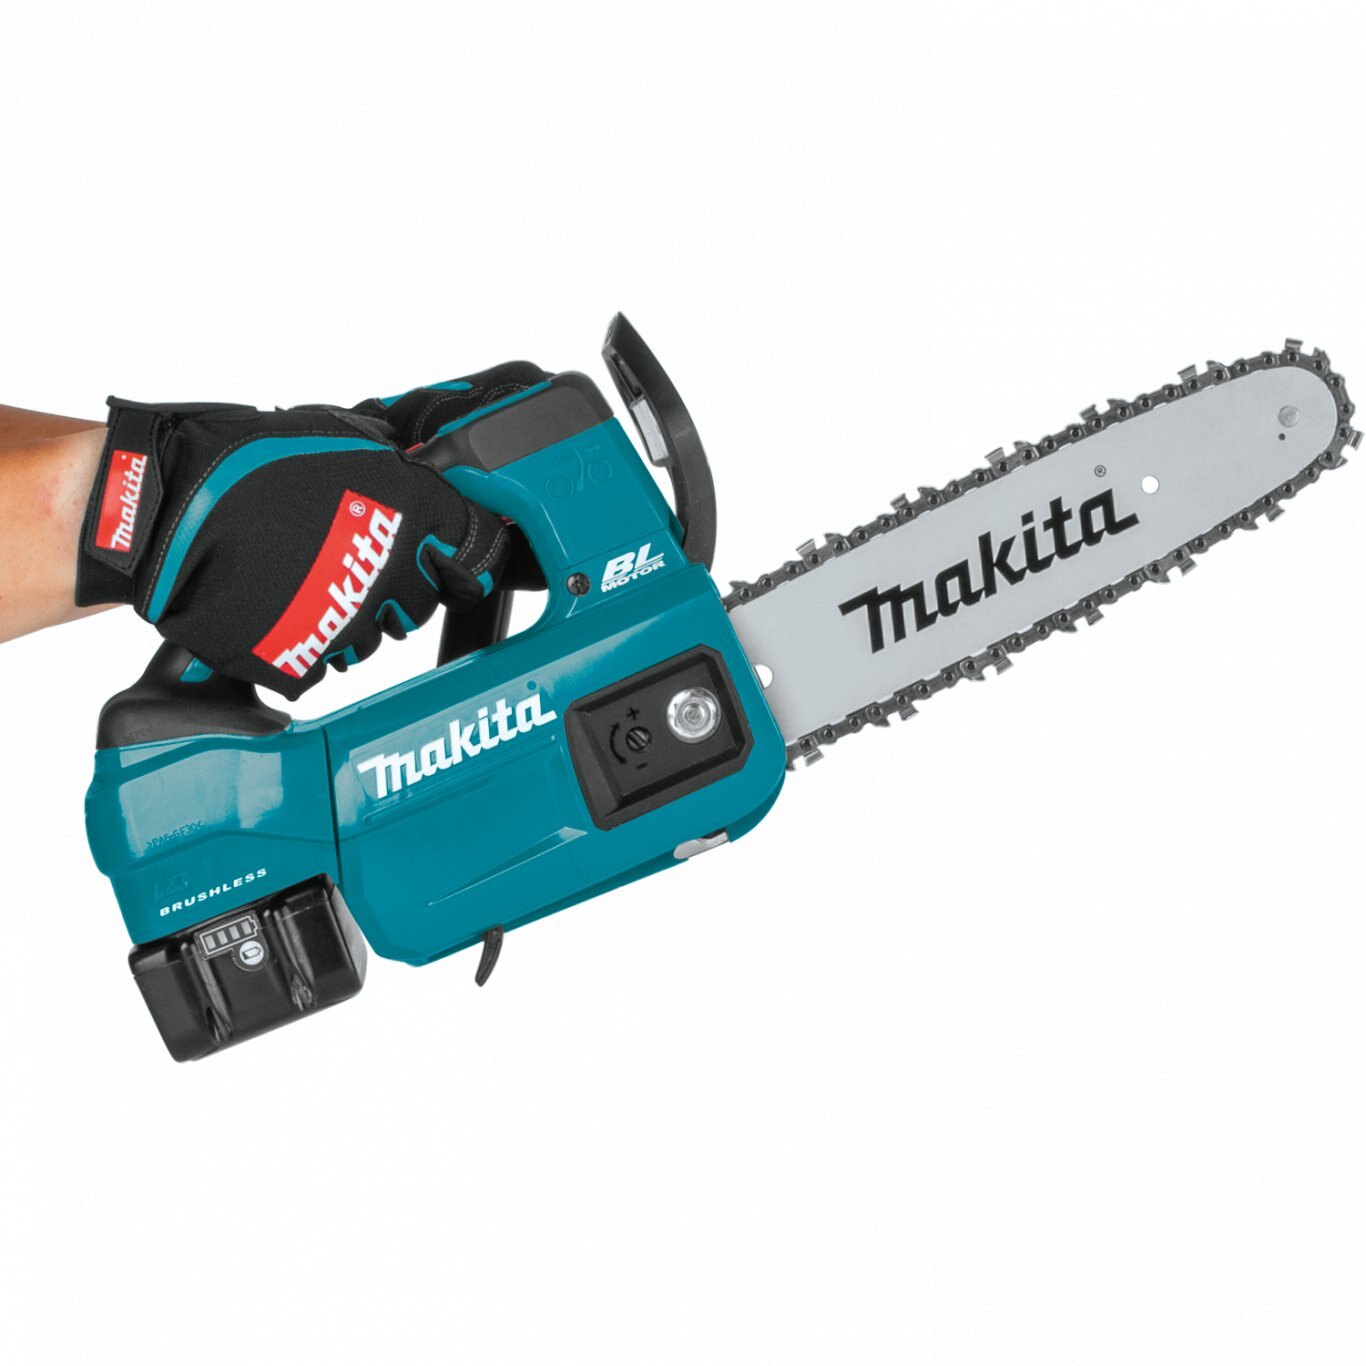 Makita 18V LXT® Lithium?Ion Brushless Cordless 12 Top Handle Chain Saw Kit (4.0 Ah)